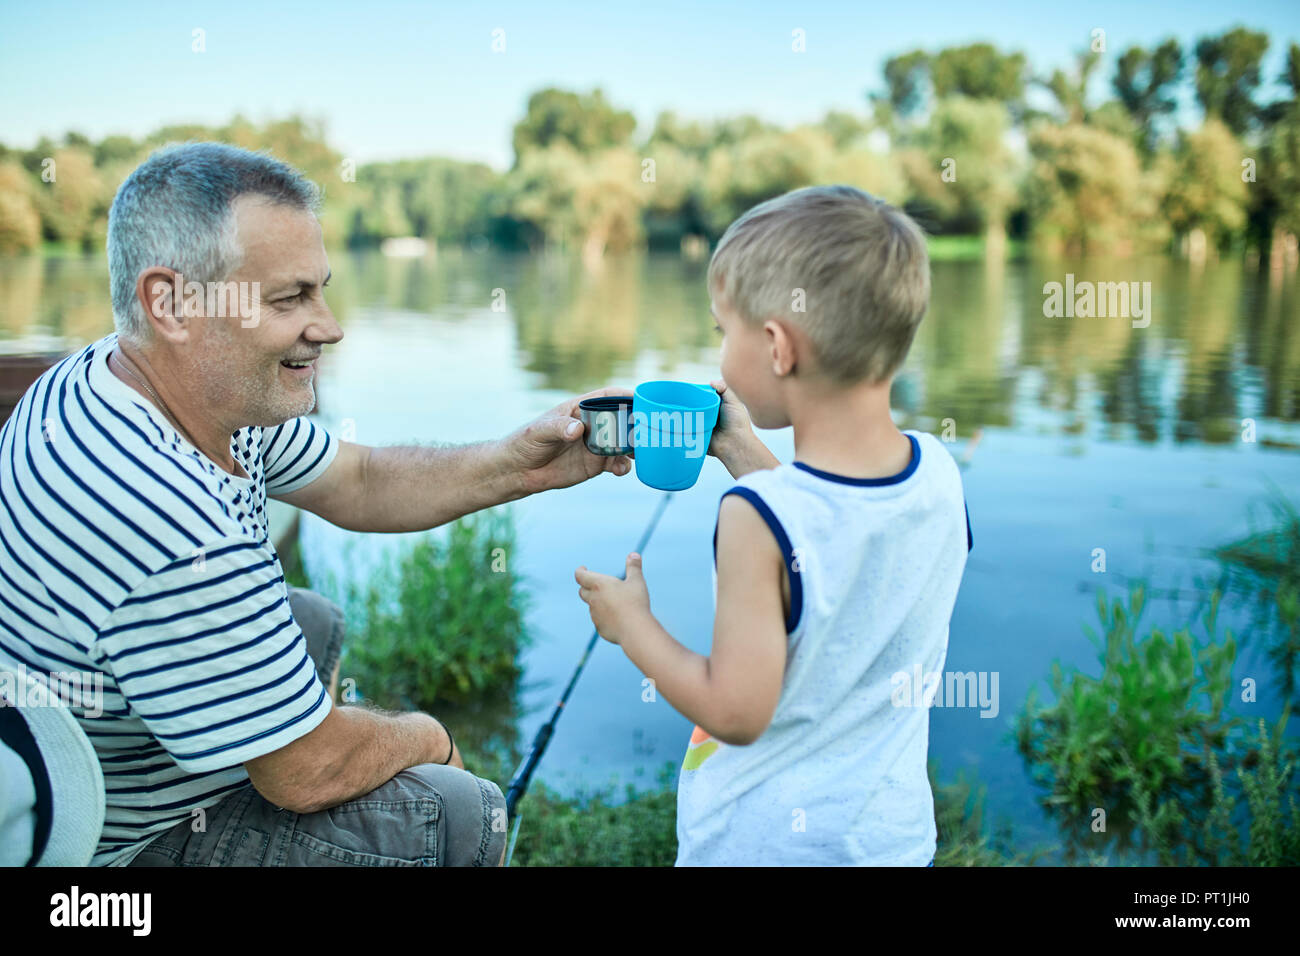 Grandfather and grandson toasting together at lakeshore Stock Photo